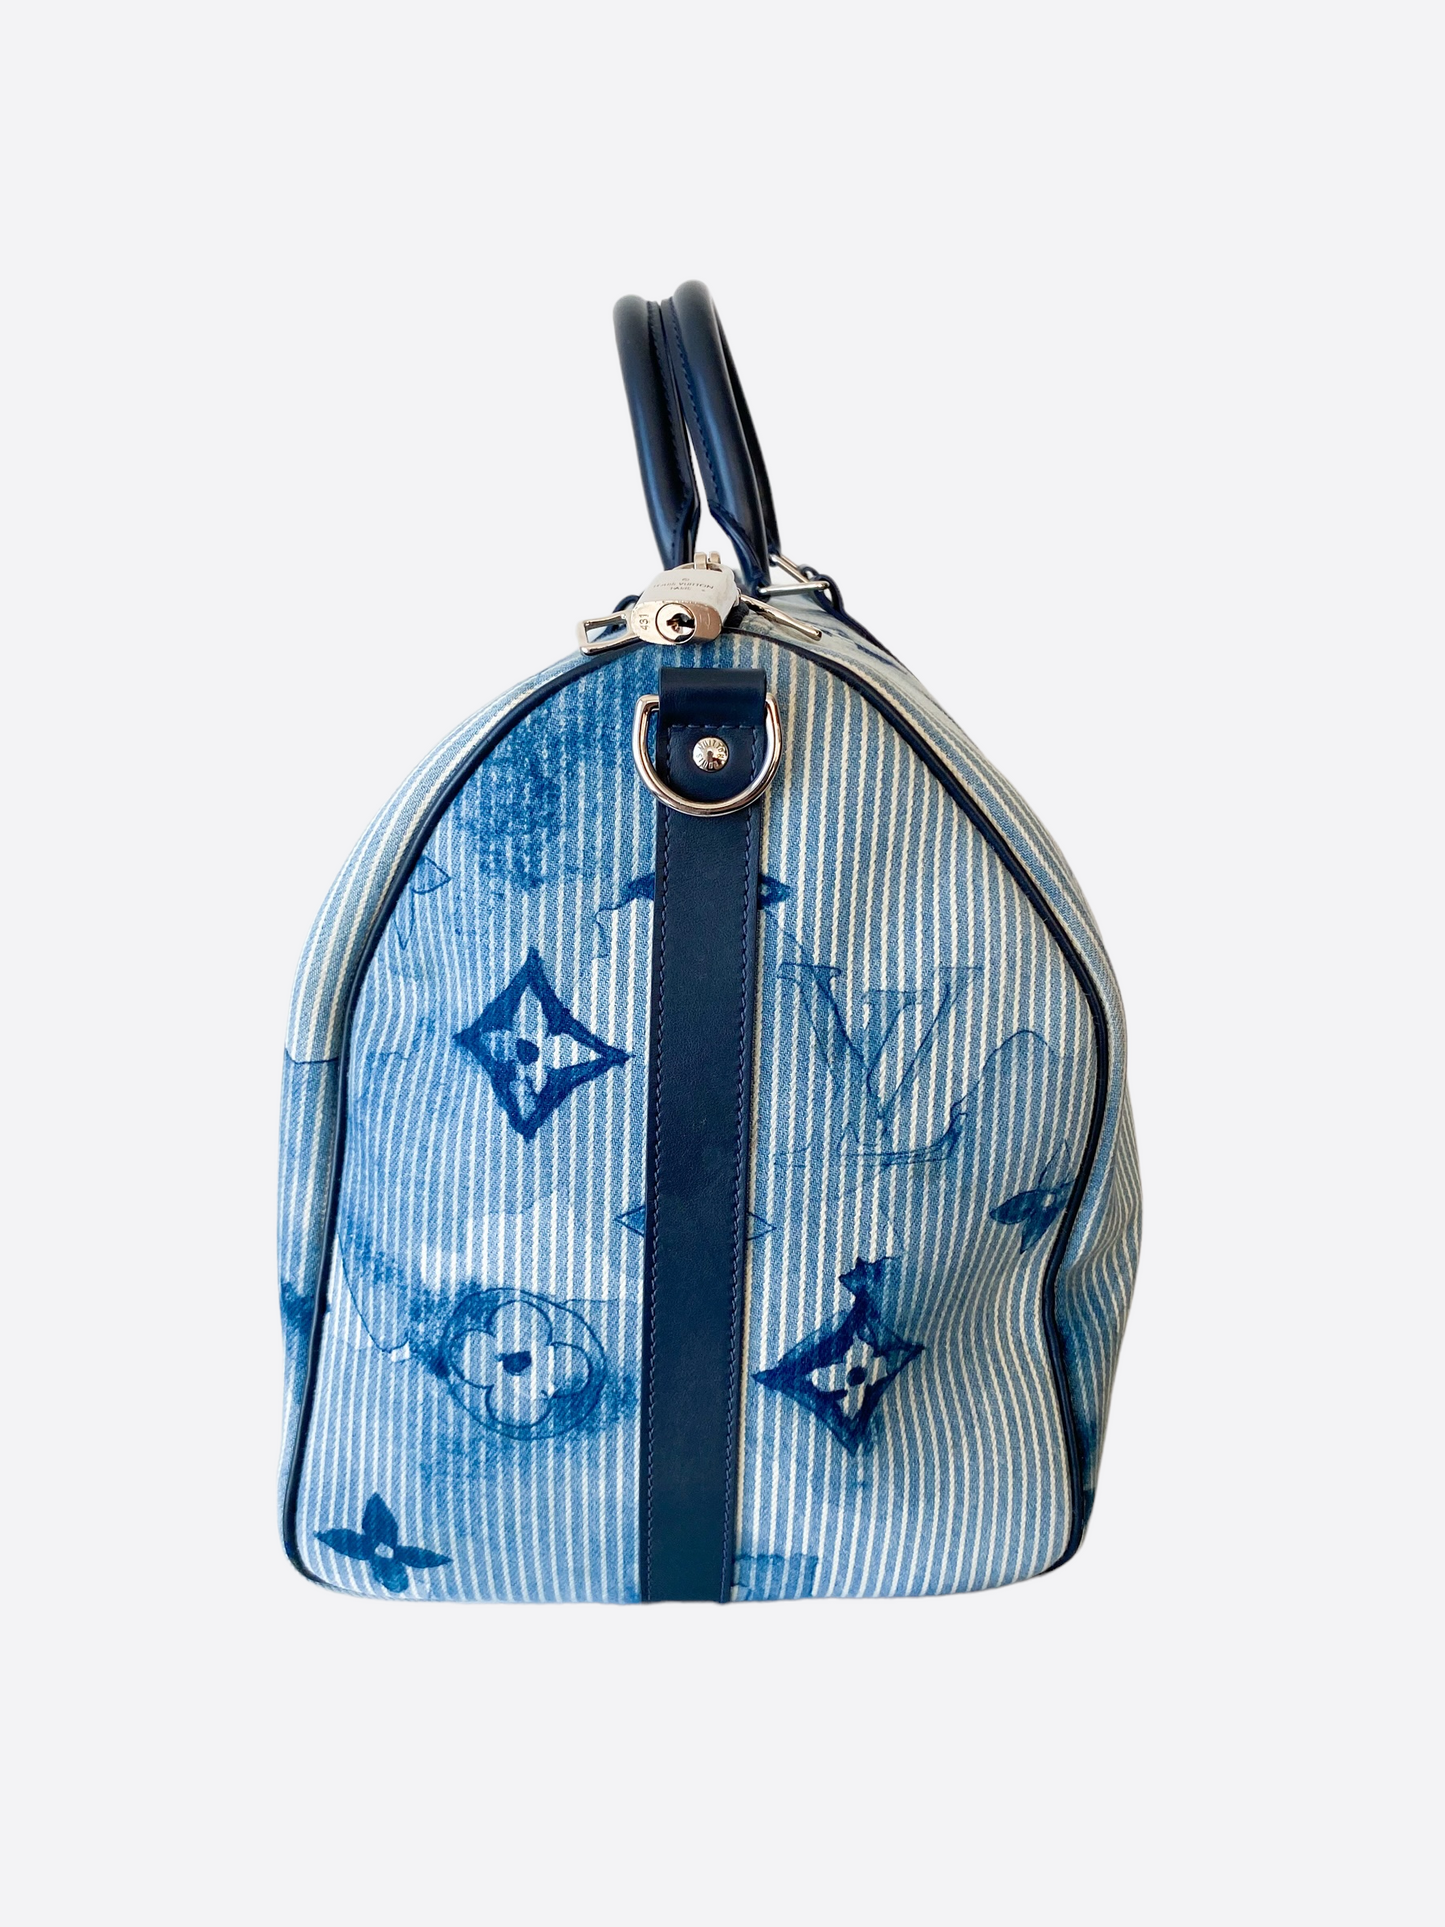 Louis Vuitton Watercolor Ink Keepall 50